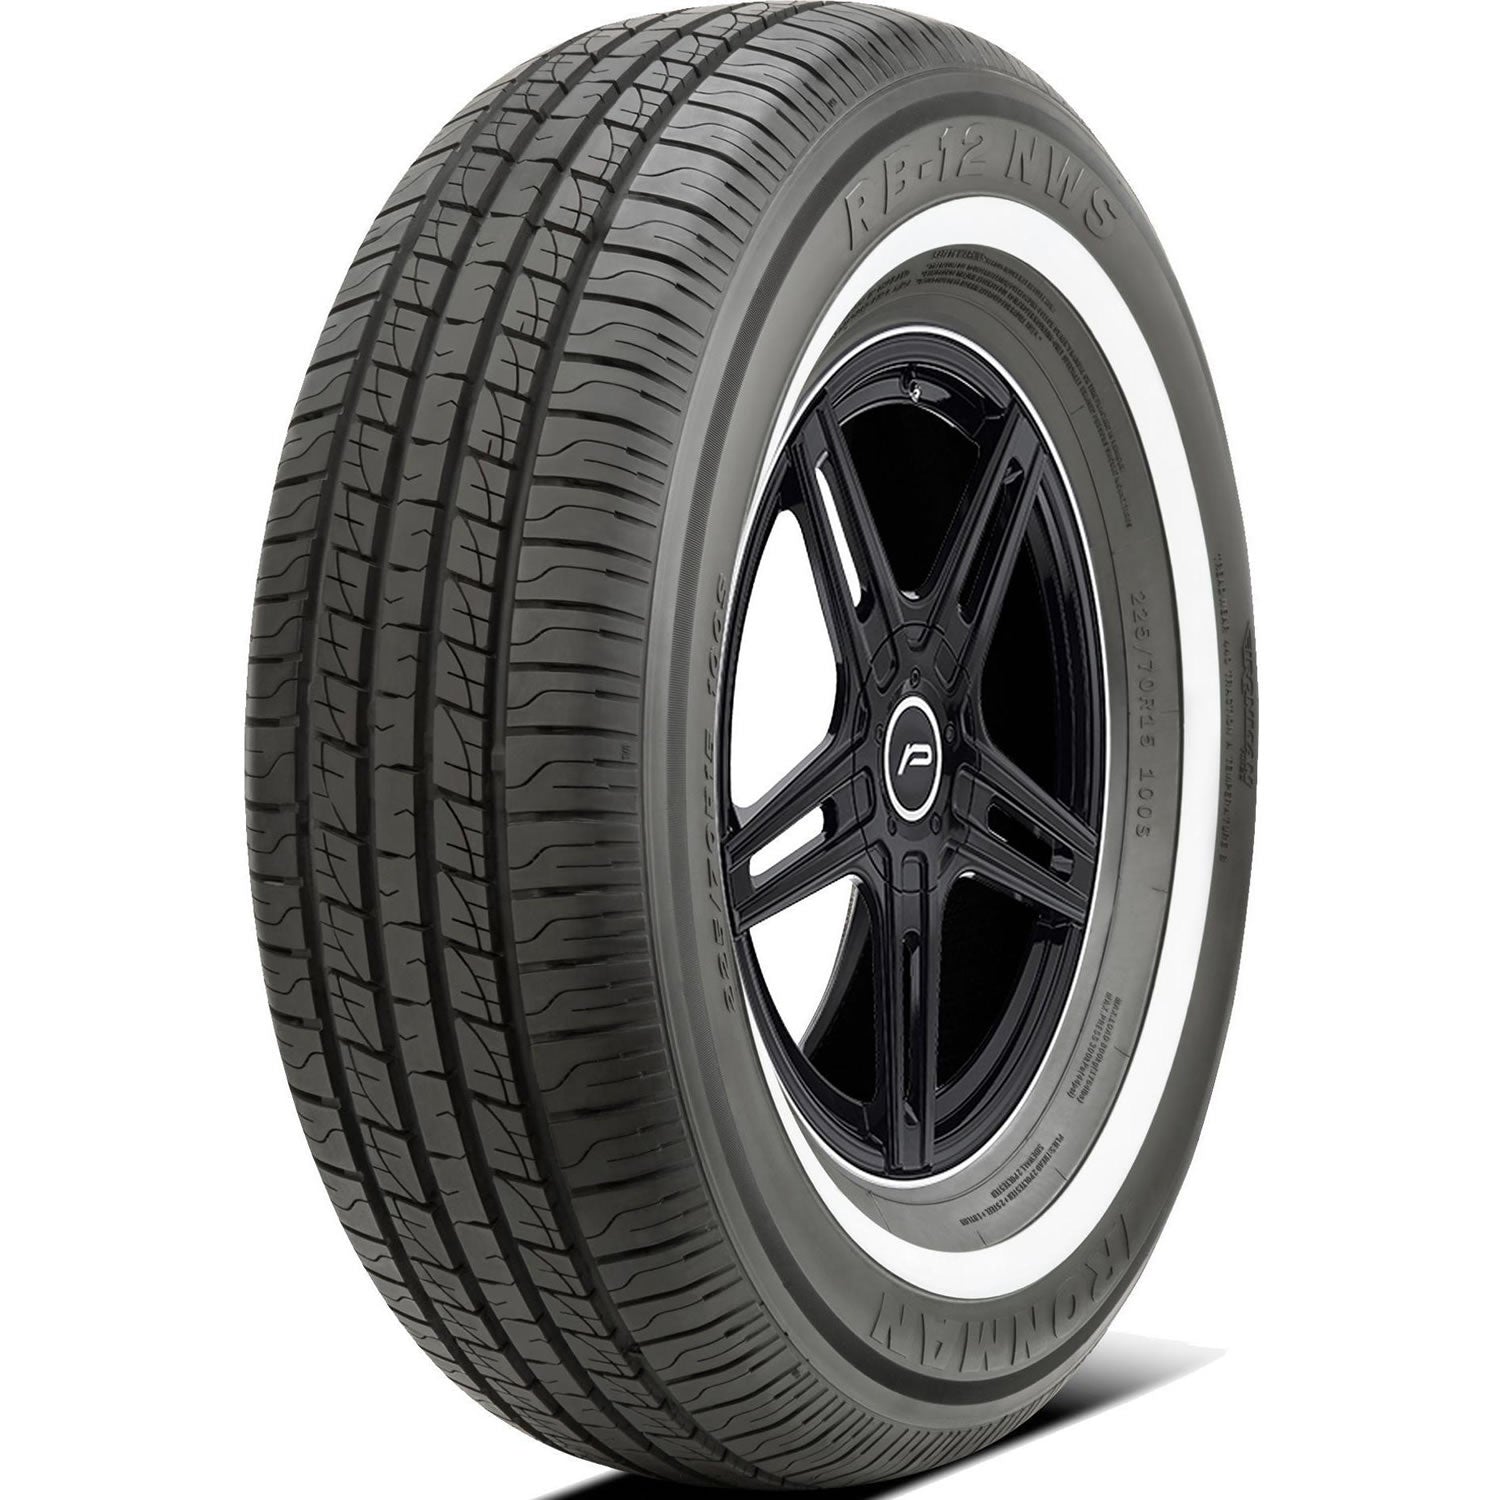 IRONMAN RB-12 NWS 225/75R15 (27.4X8.9R 15) Tires